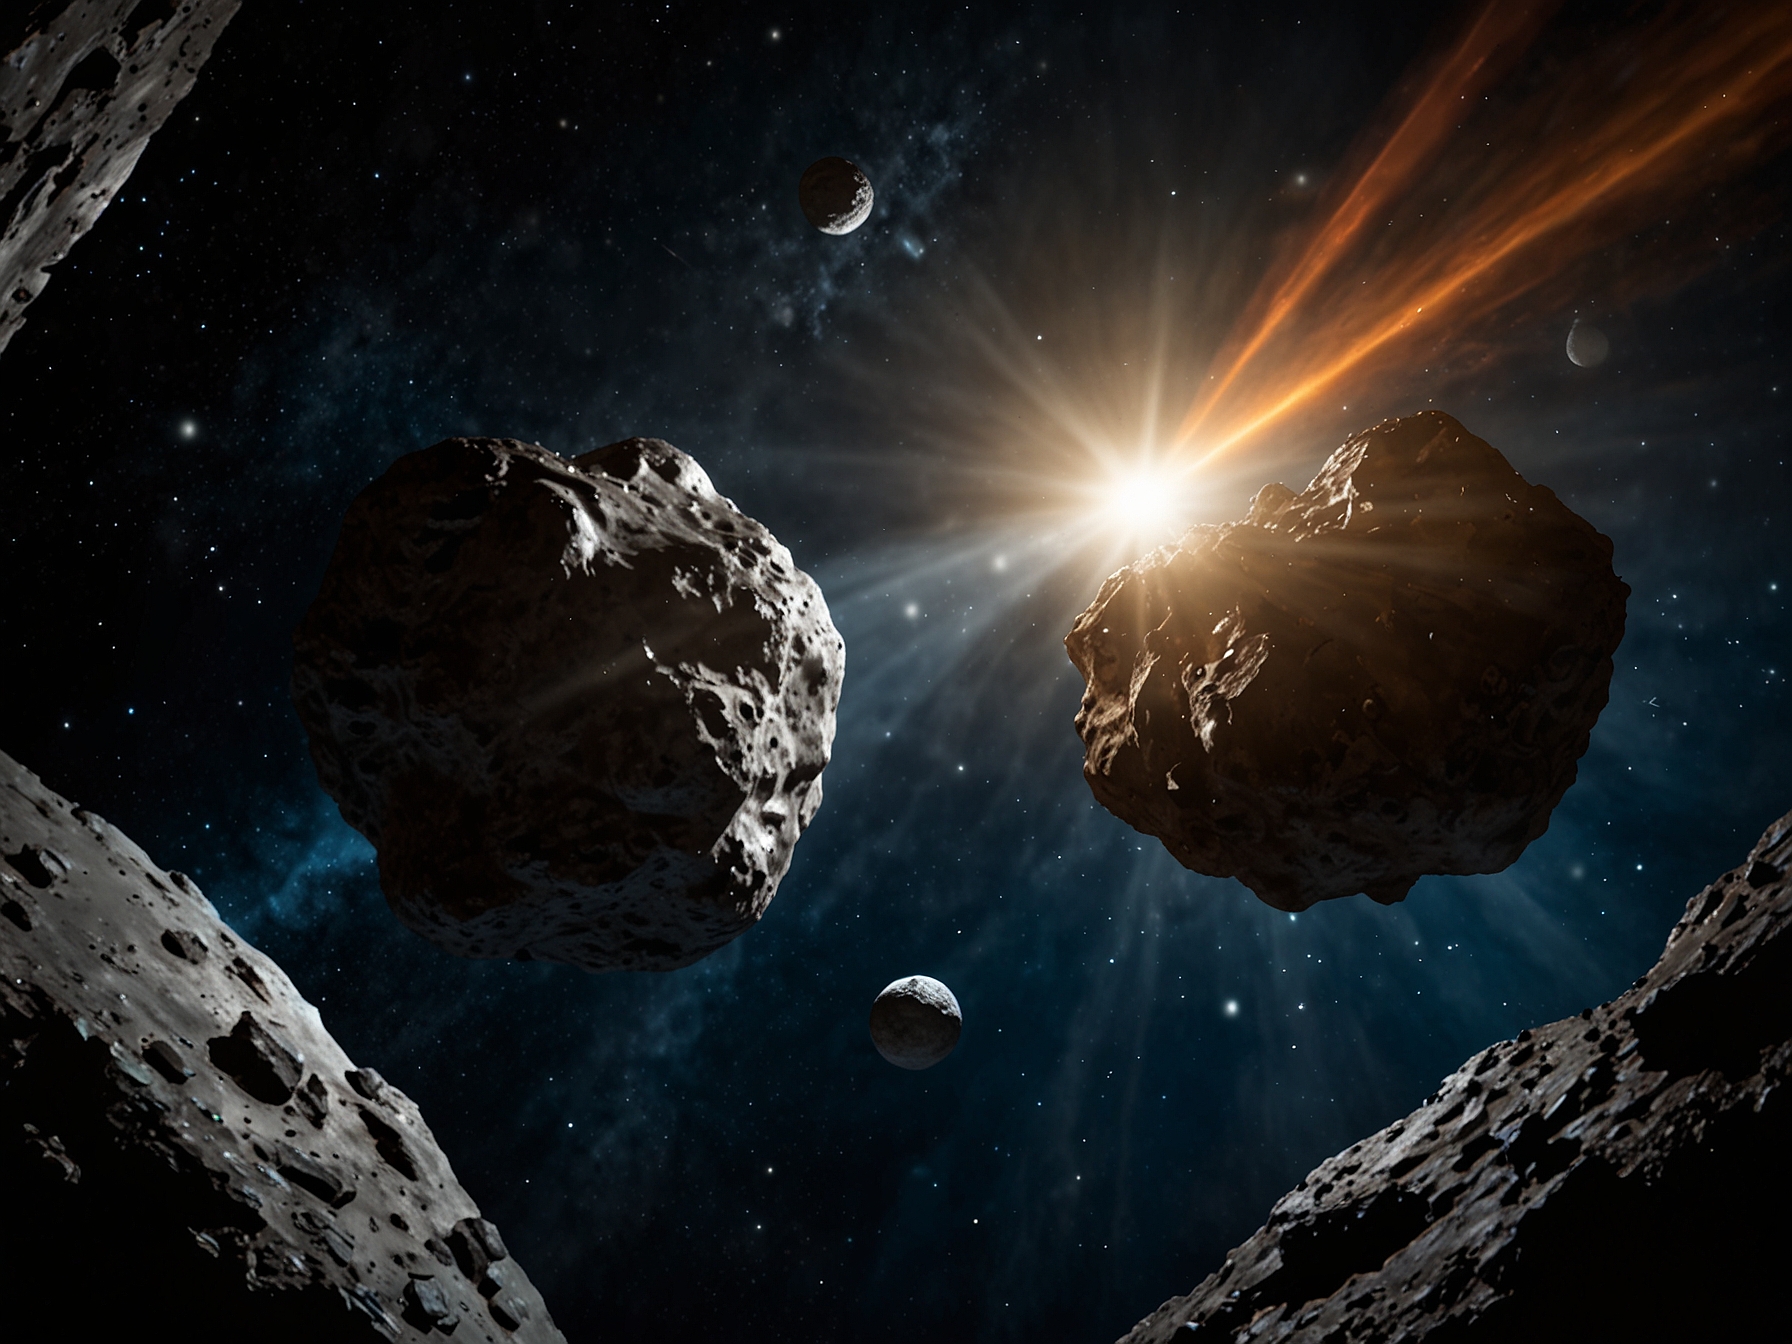 NASA scientists and emergency responders analyze data on potentially hazardous asteroids using advanced detection systems and computational models to improve impact prediction accuracy.